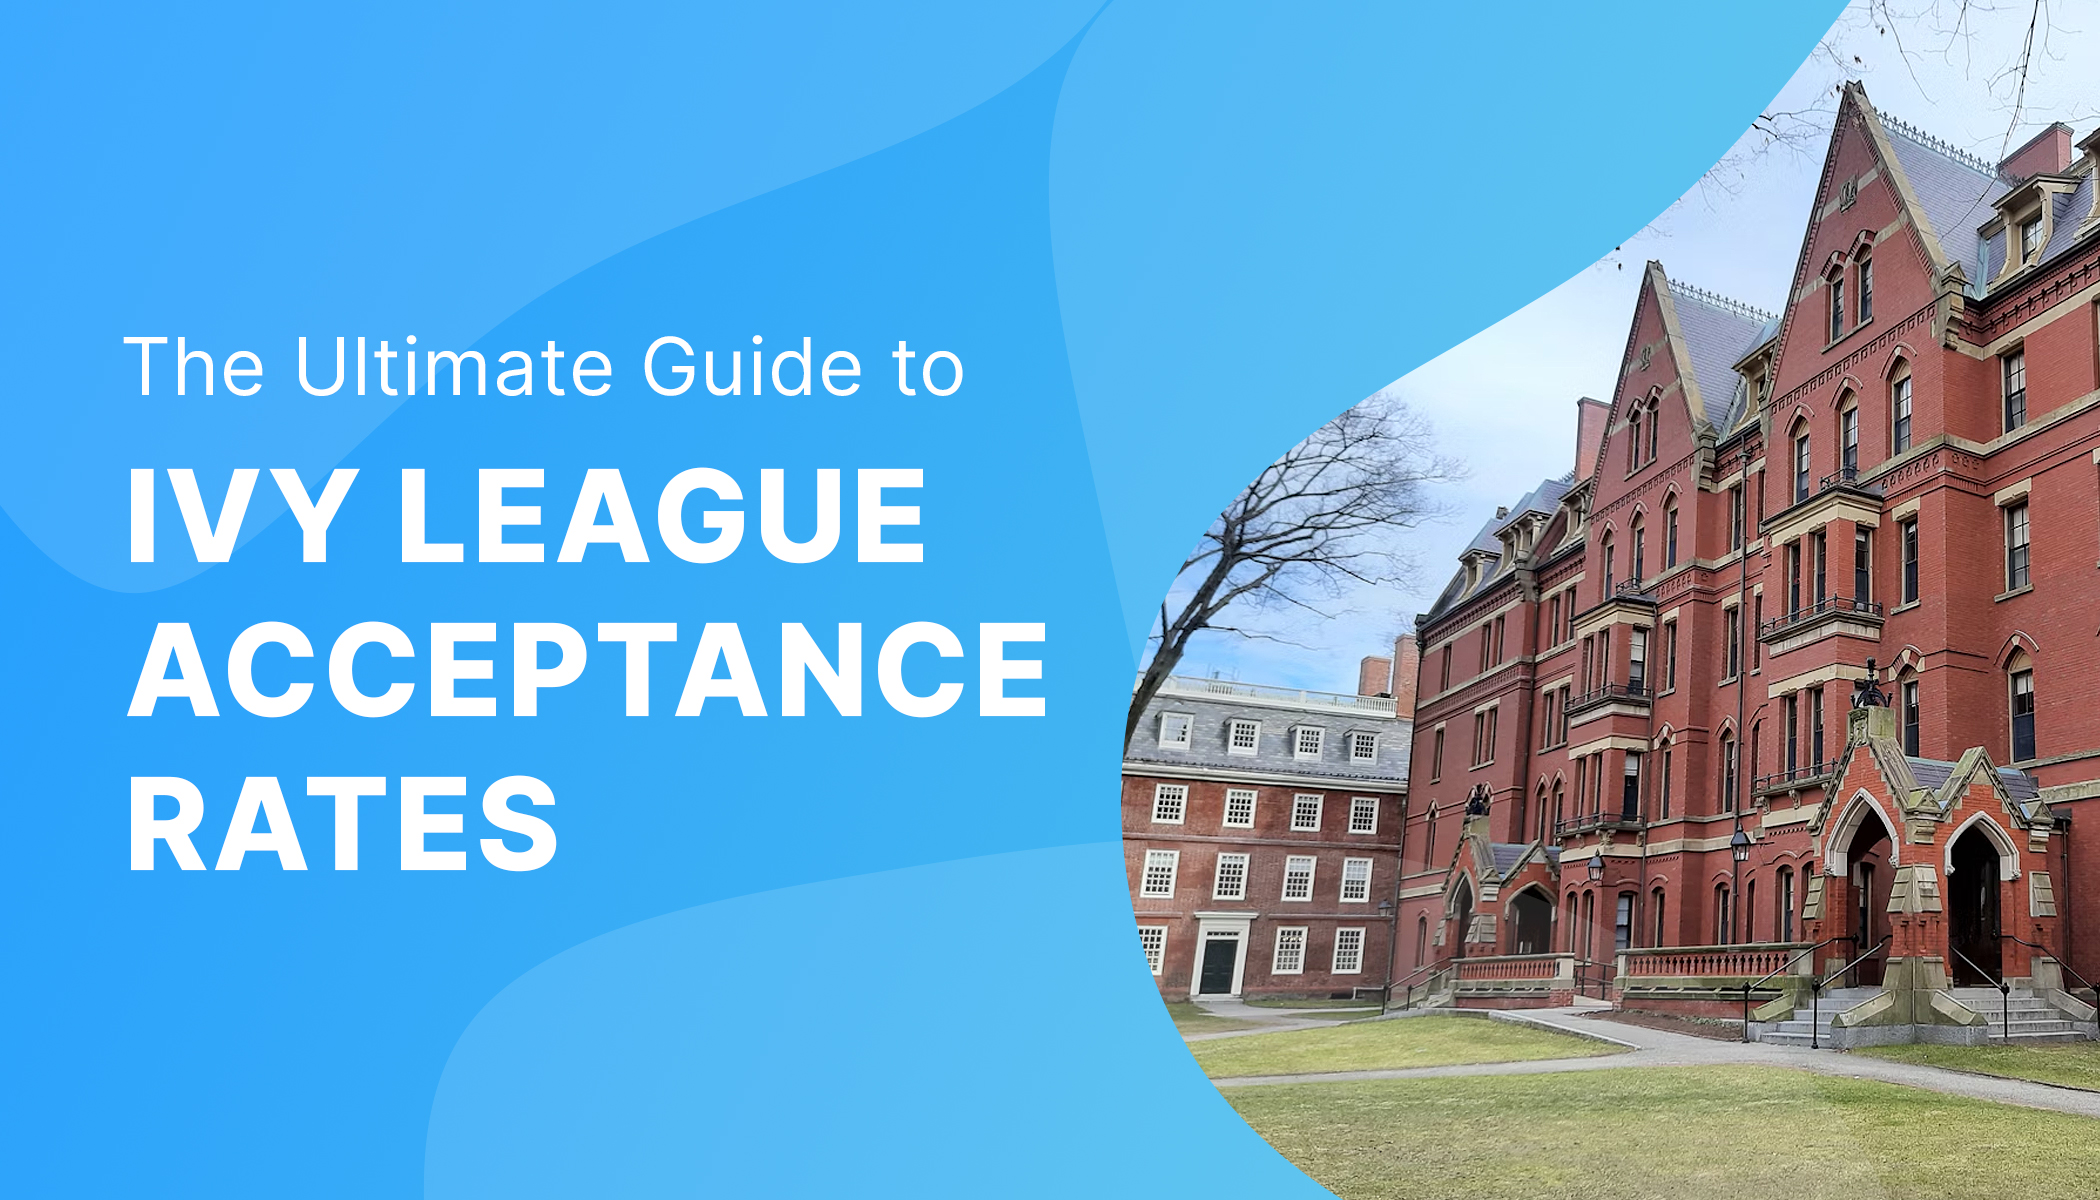 Ivy League Acceptance Rates The Ultimate Guide